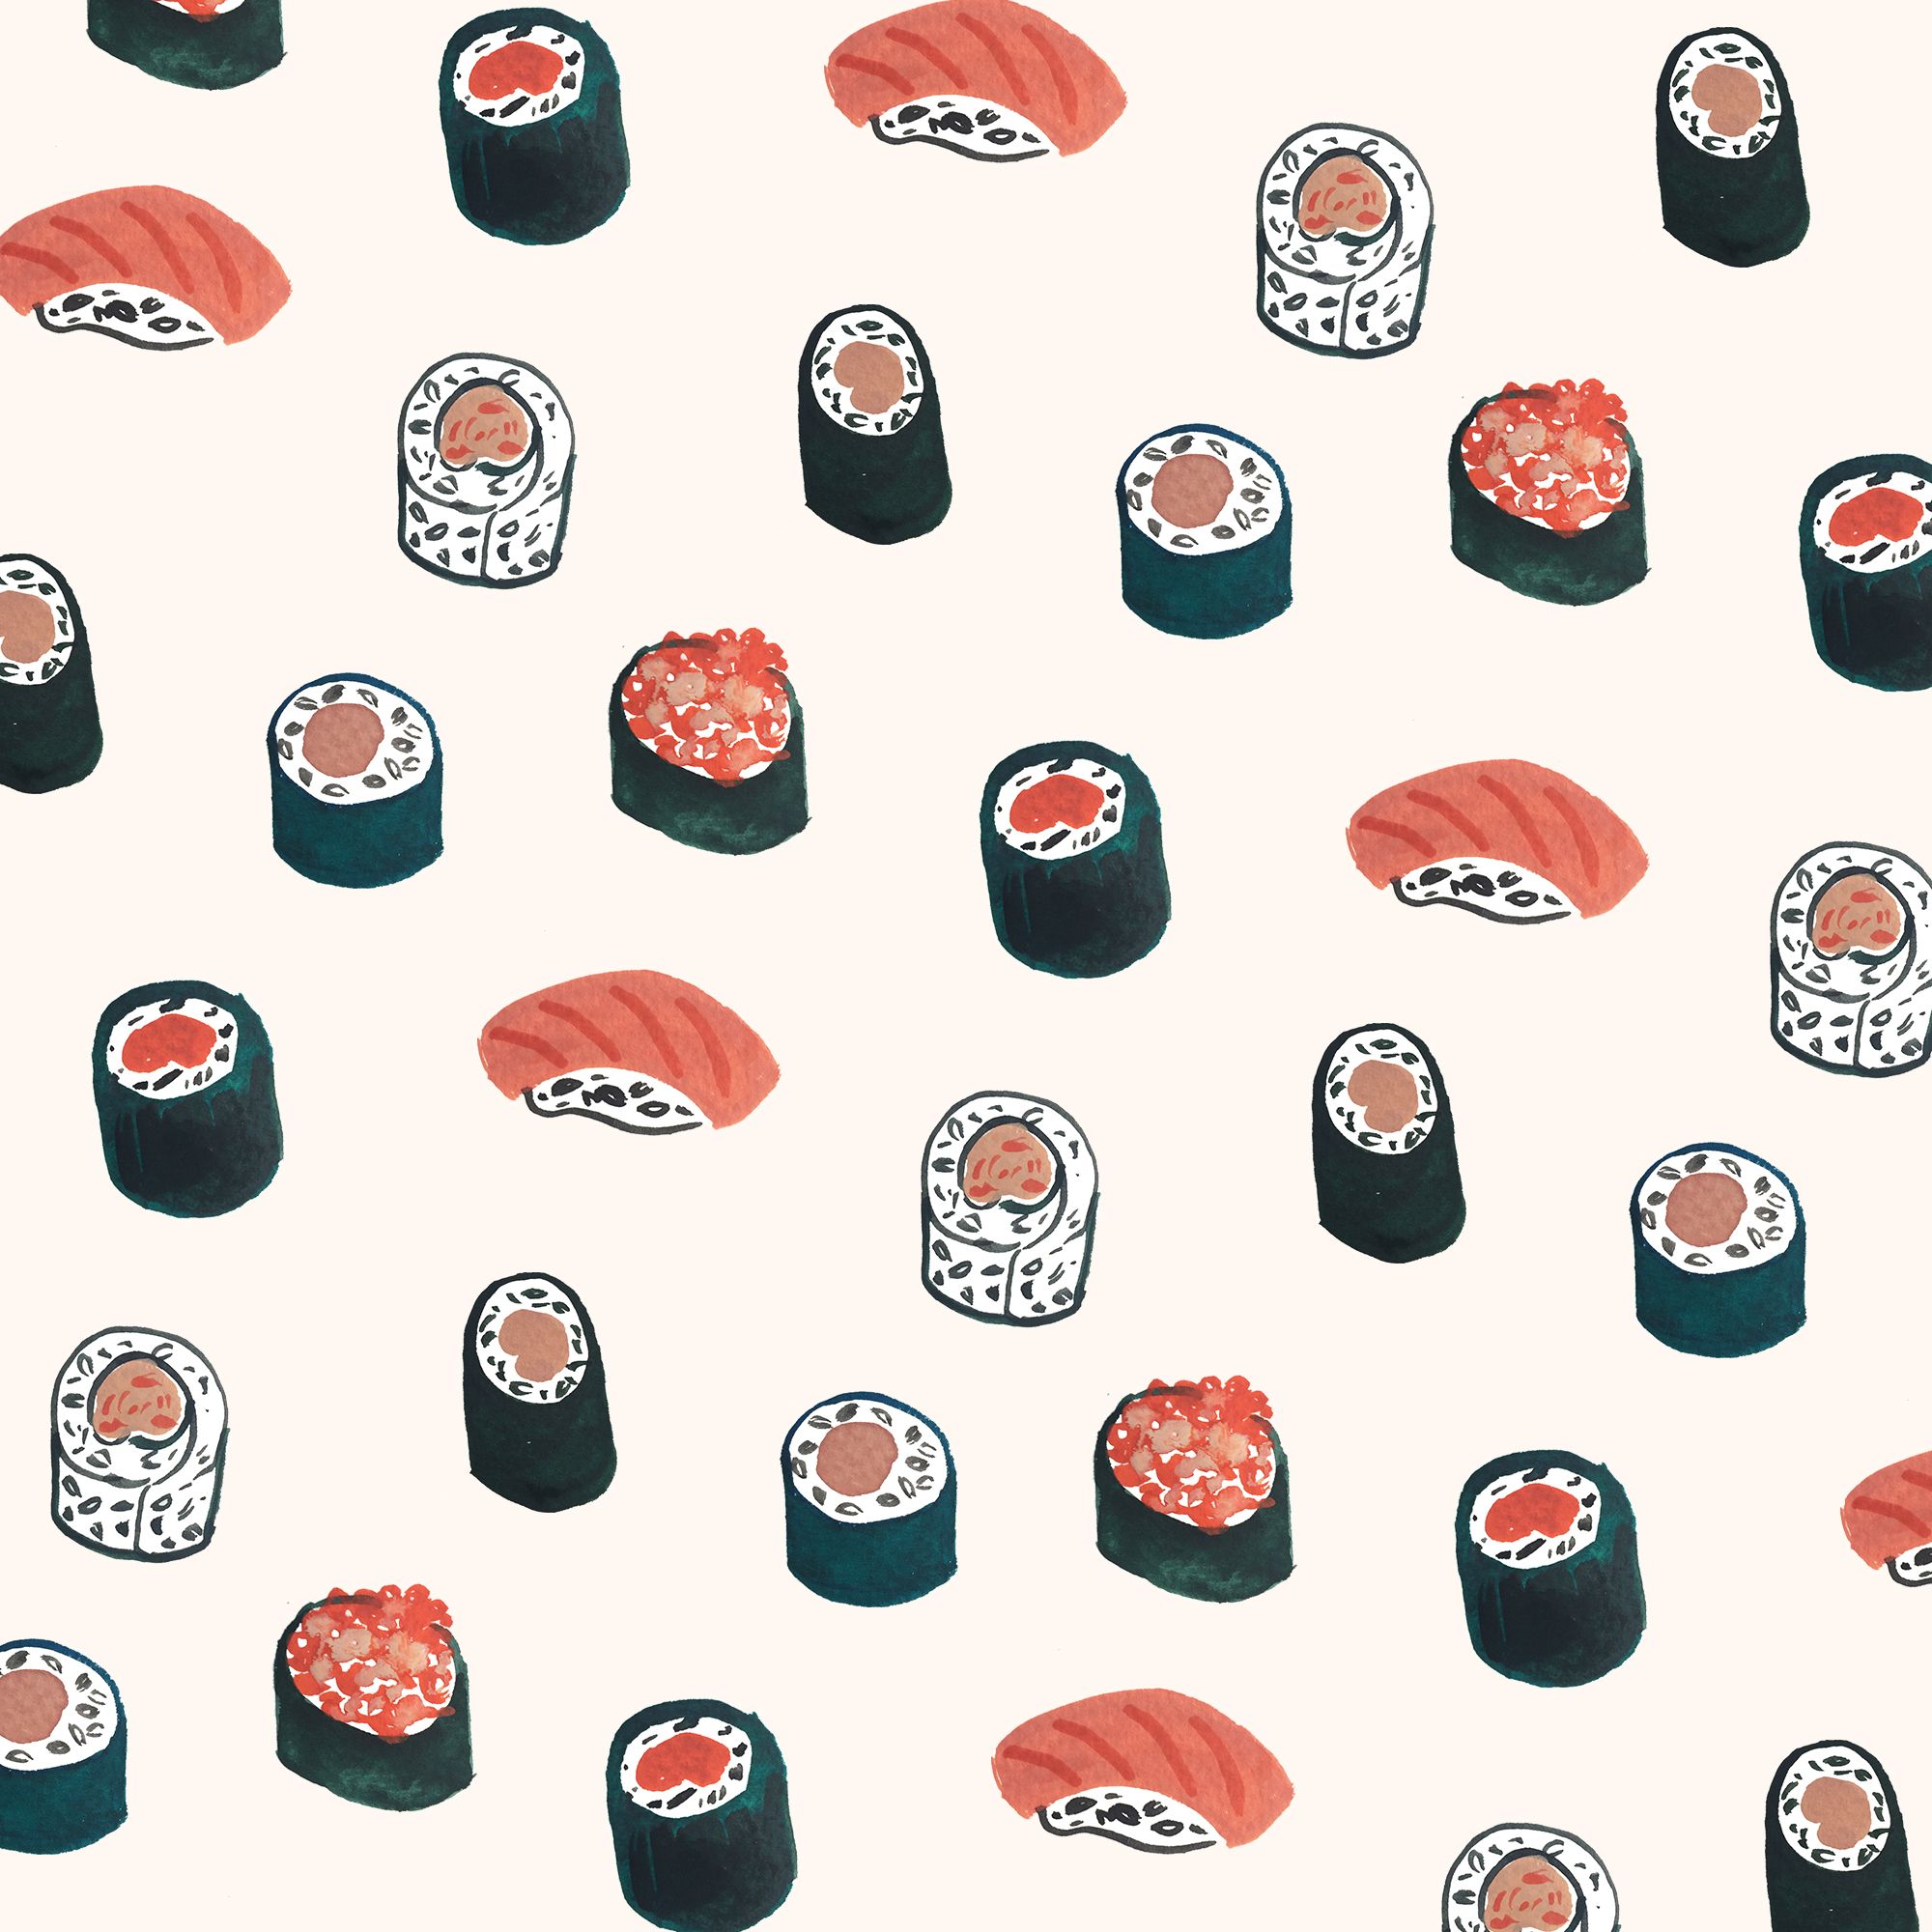 A pattern of different types of sushi - Sushi